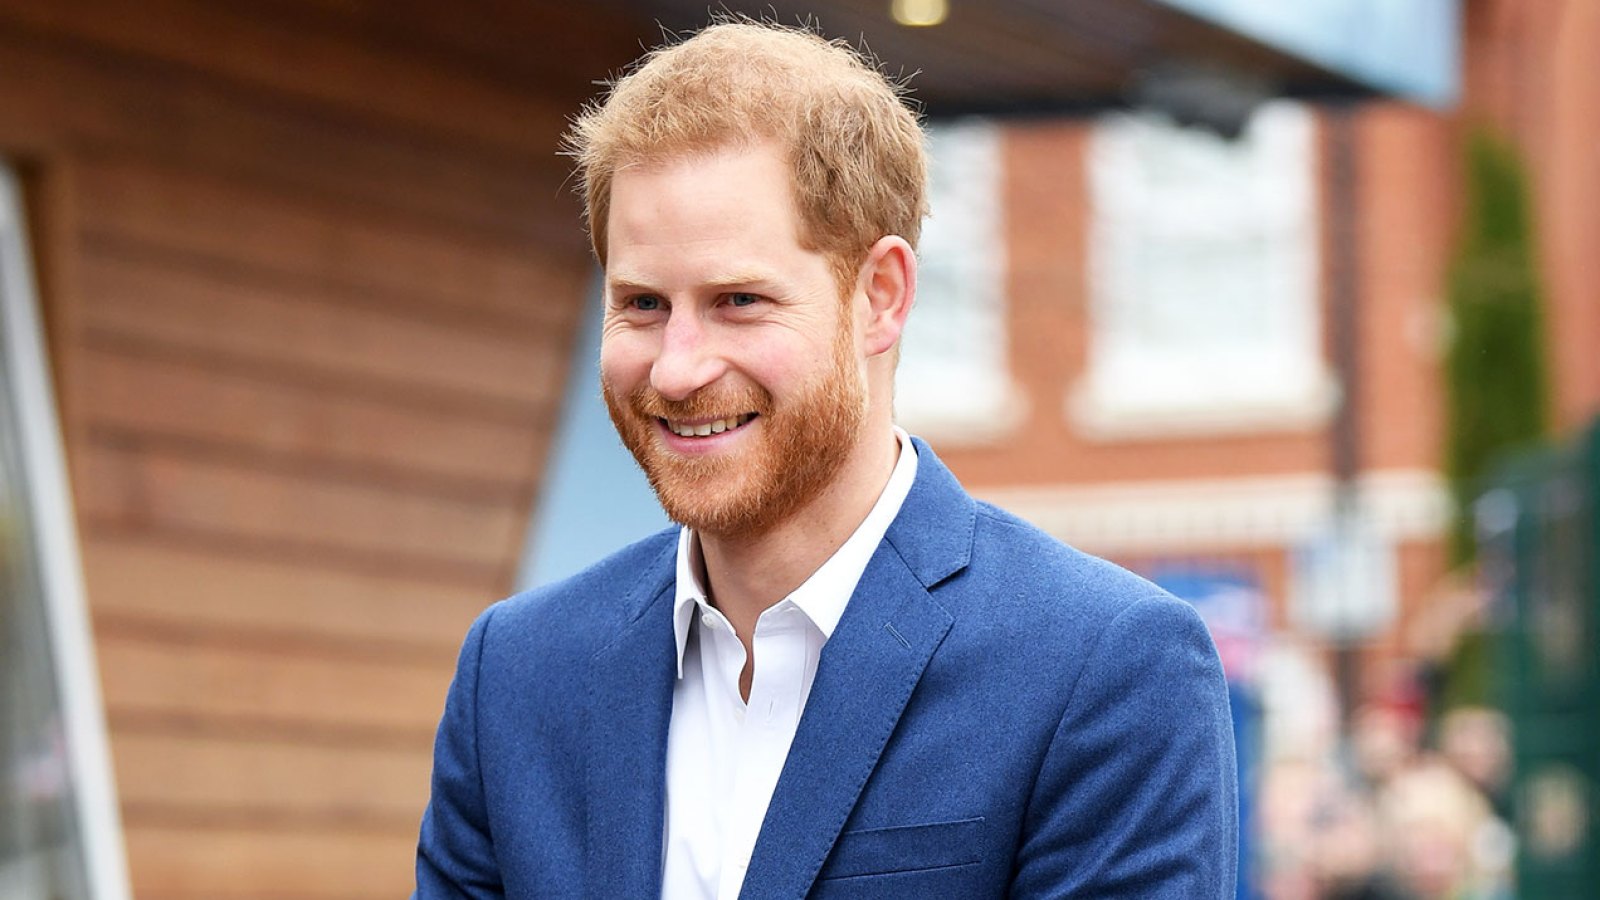 Prince Harry Will Take a Paternity Leave, Queen Elizabeth II’s Former Spokesperson Says